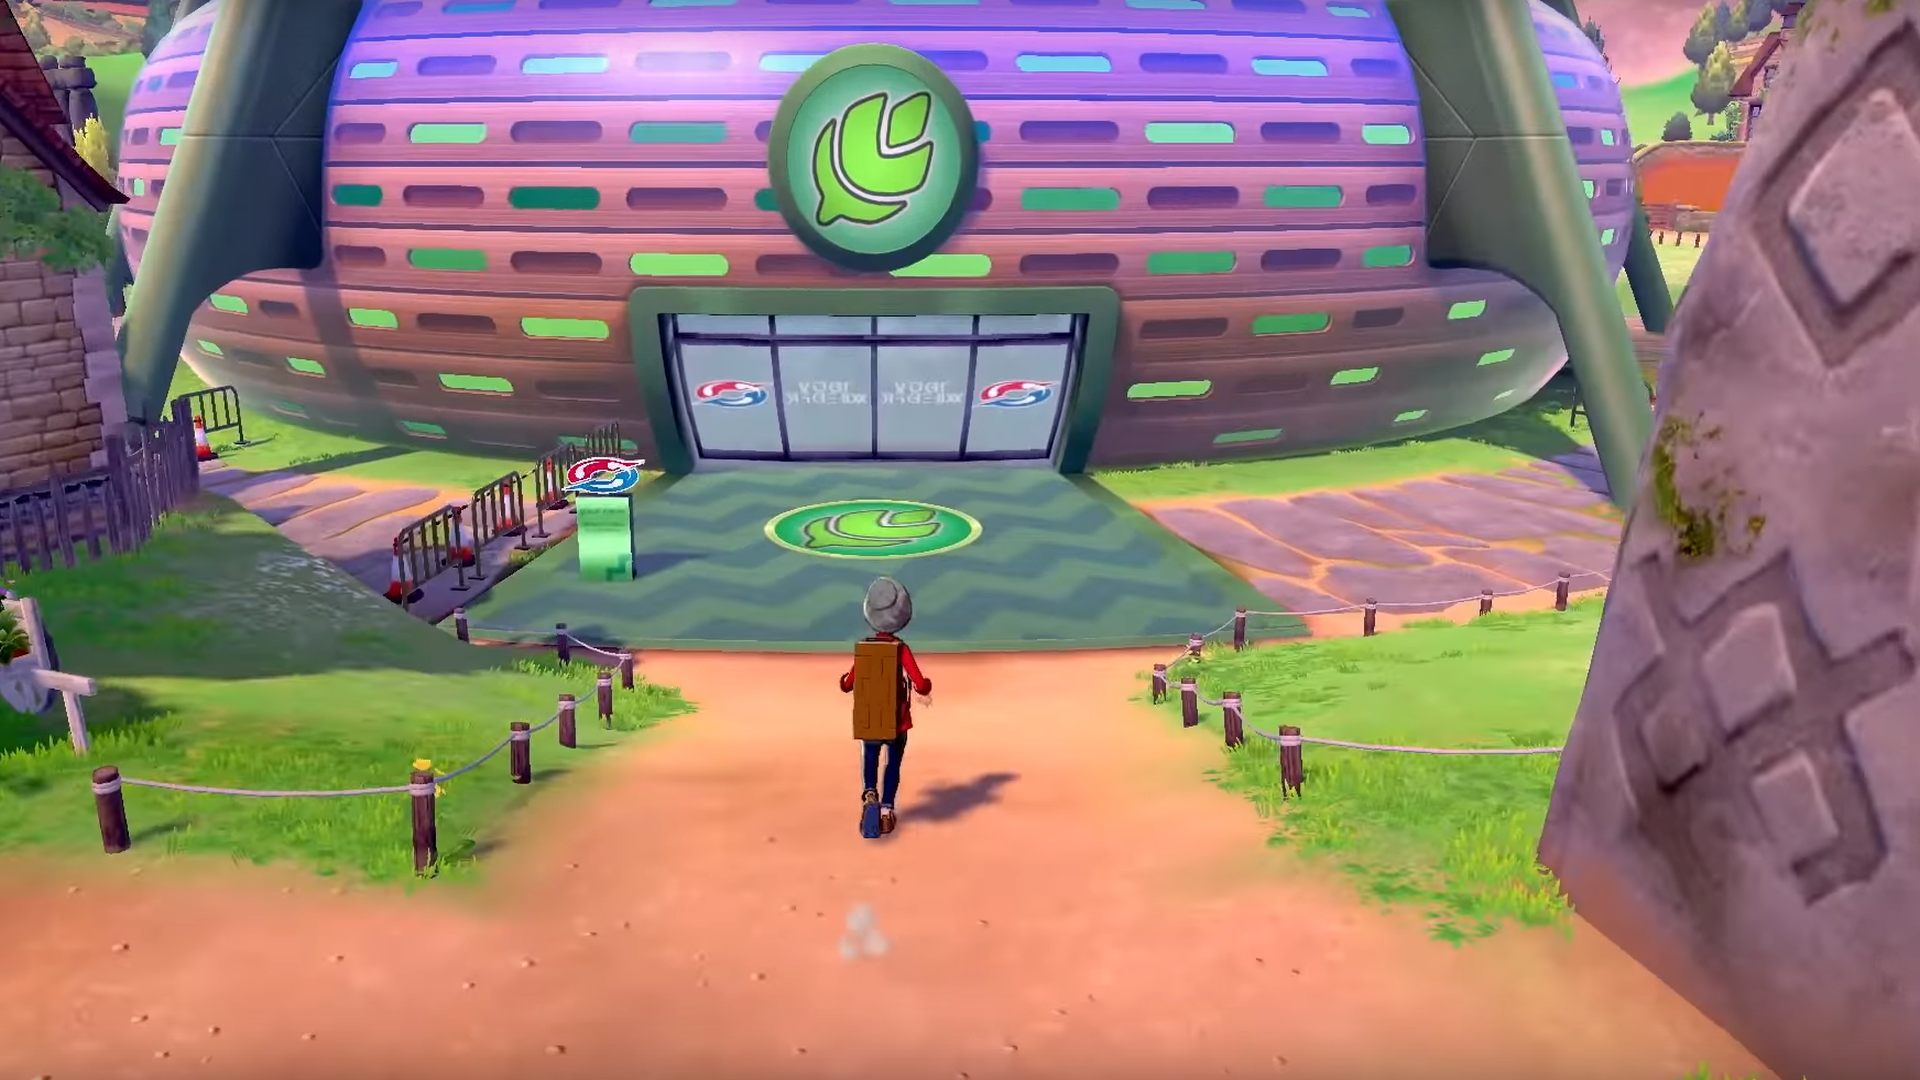 Pokémon Sword and Shield': Nintendo Switch Gameplay Feature